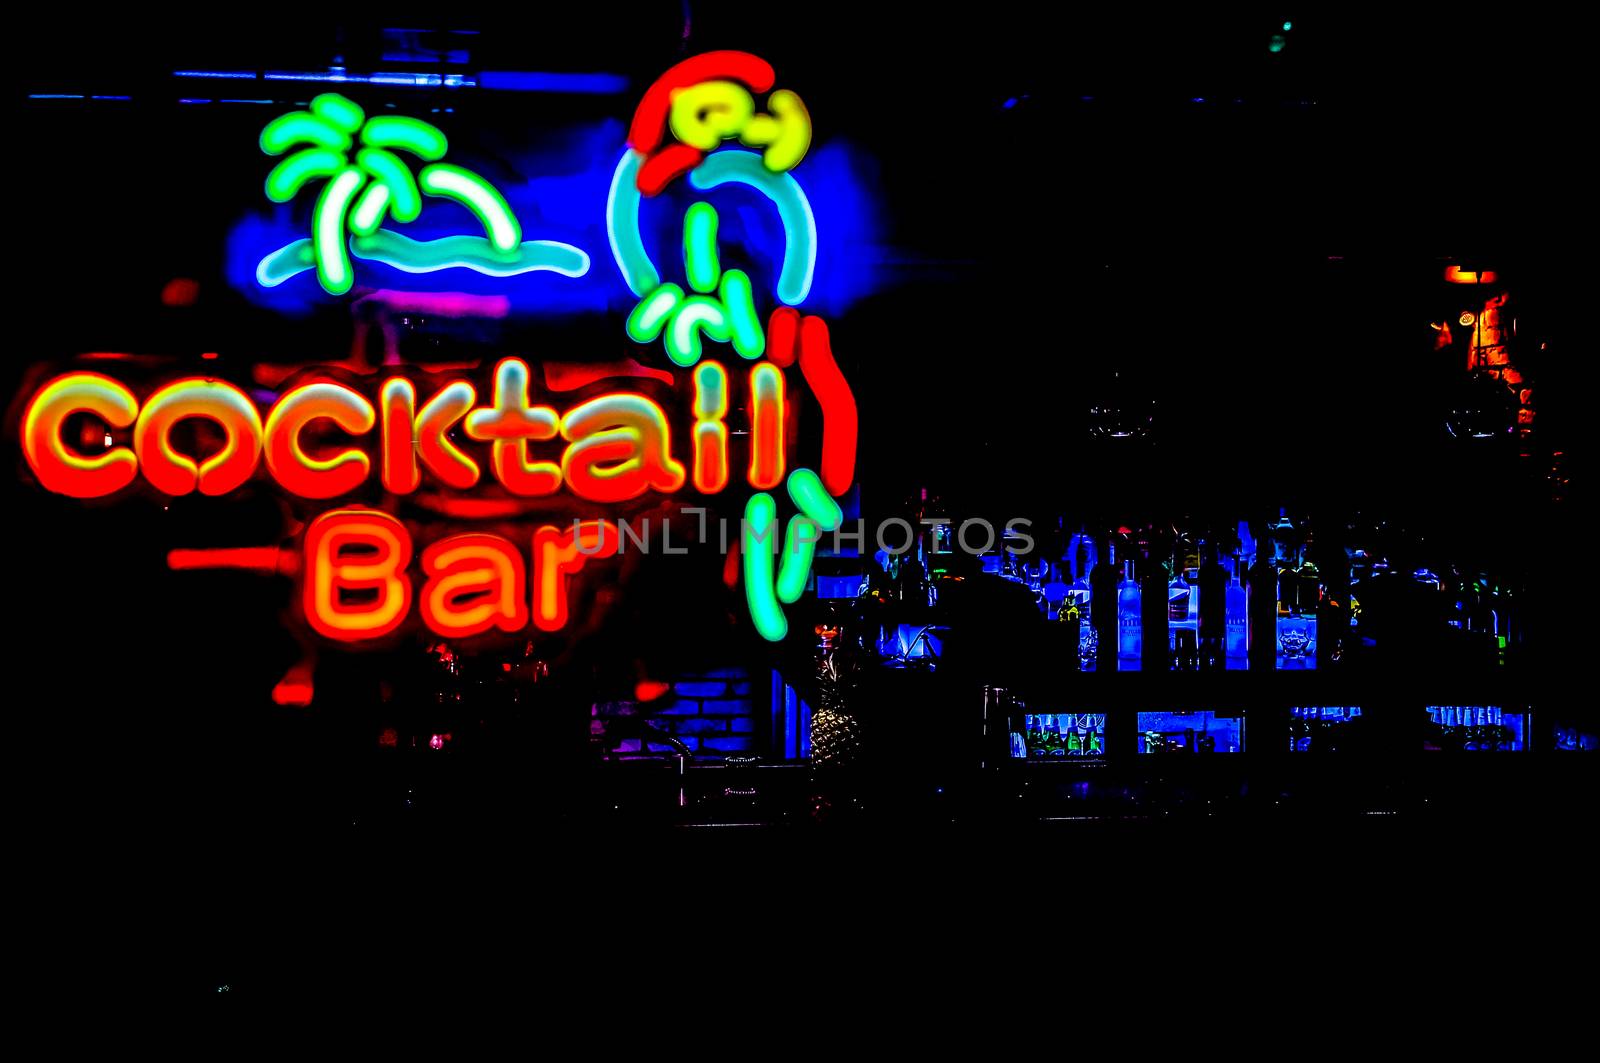 Cocktail Bar Neon Sign, Bar in the Background